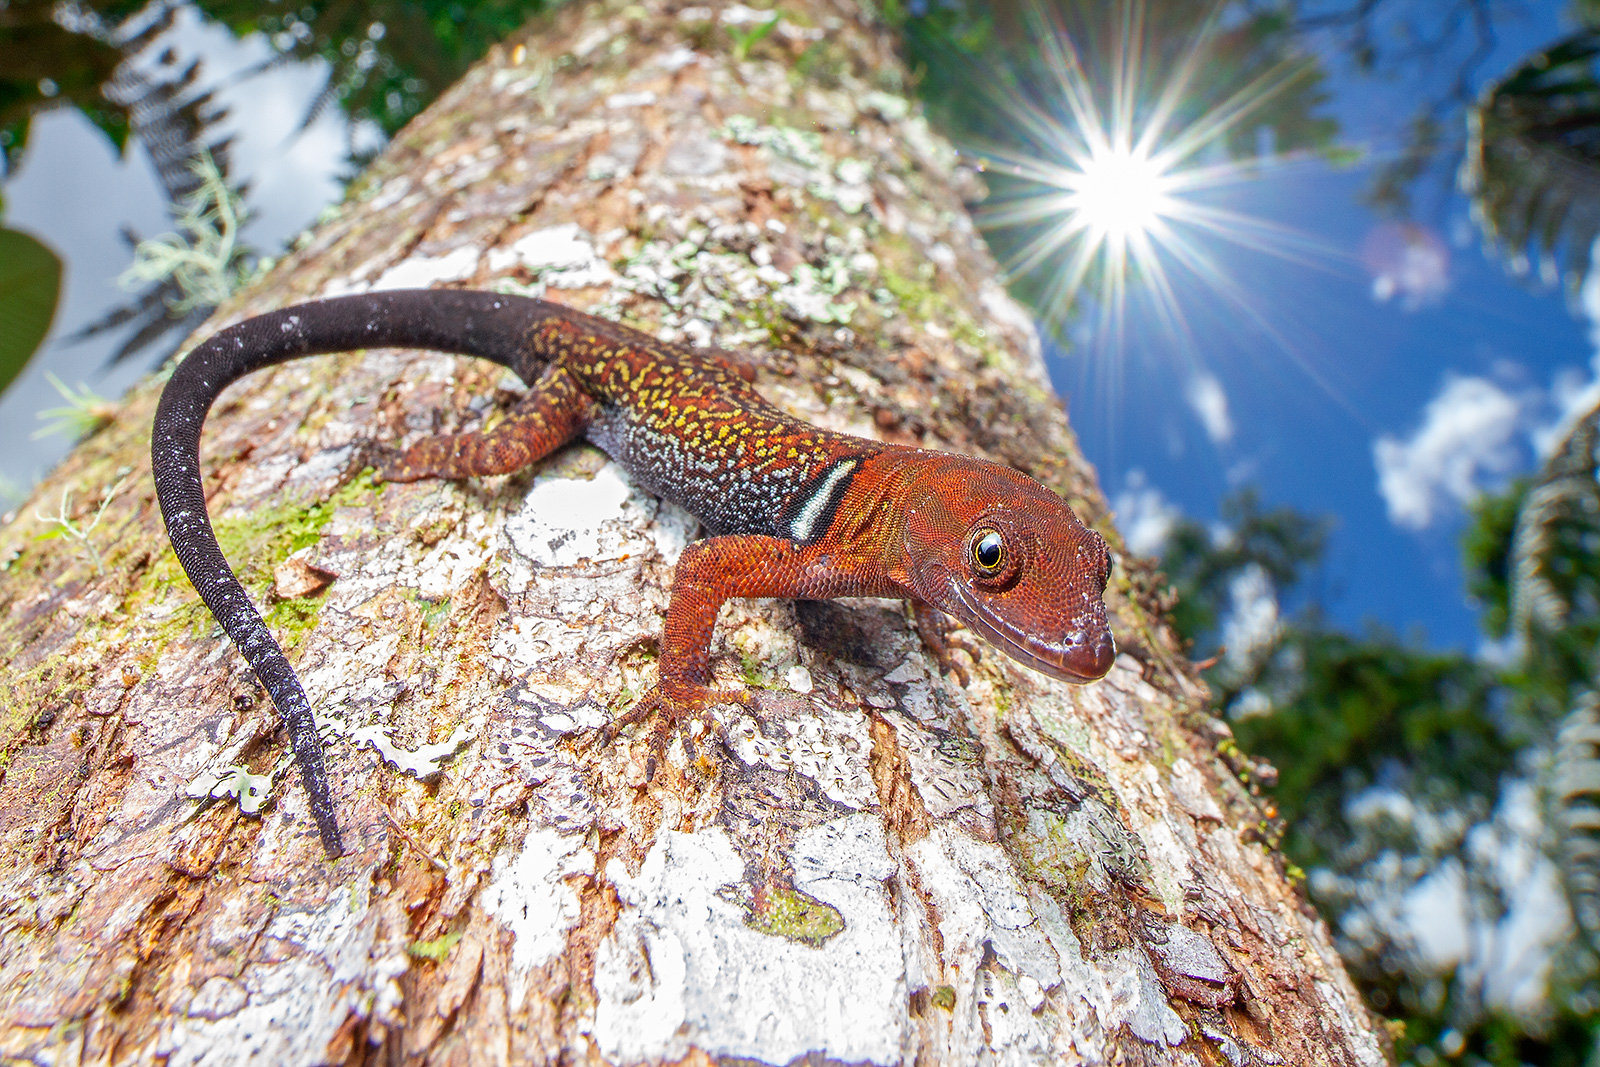 Picture of a Bridled Sun-Gecko (Gonatodes concinnatus) on a tree trunk, photographed using the Laowa 15mm f/4 Macro Lens